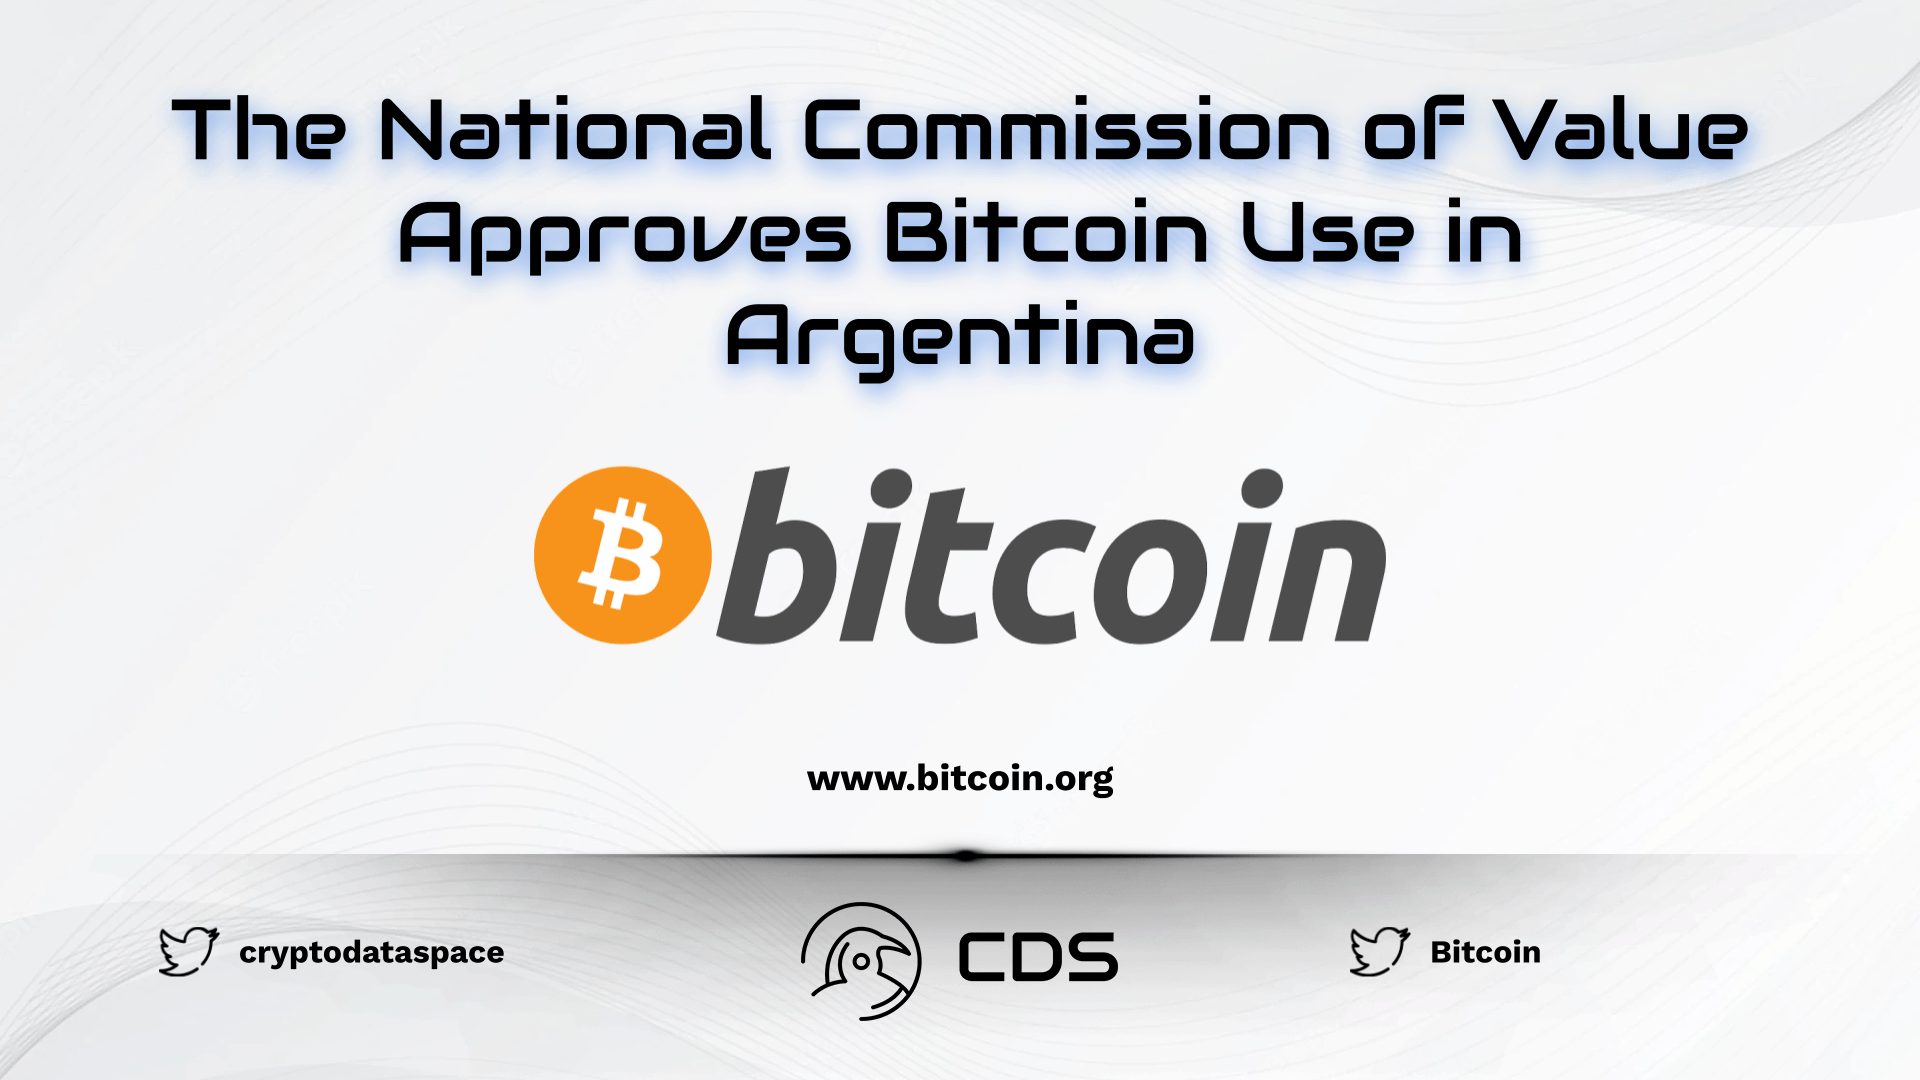 The National Commission of Value Approves Bitcoin Use in Argentina